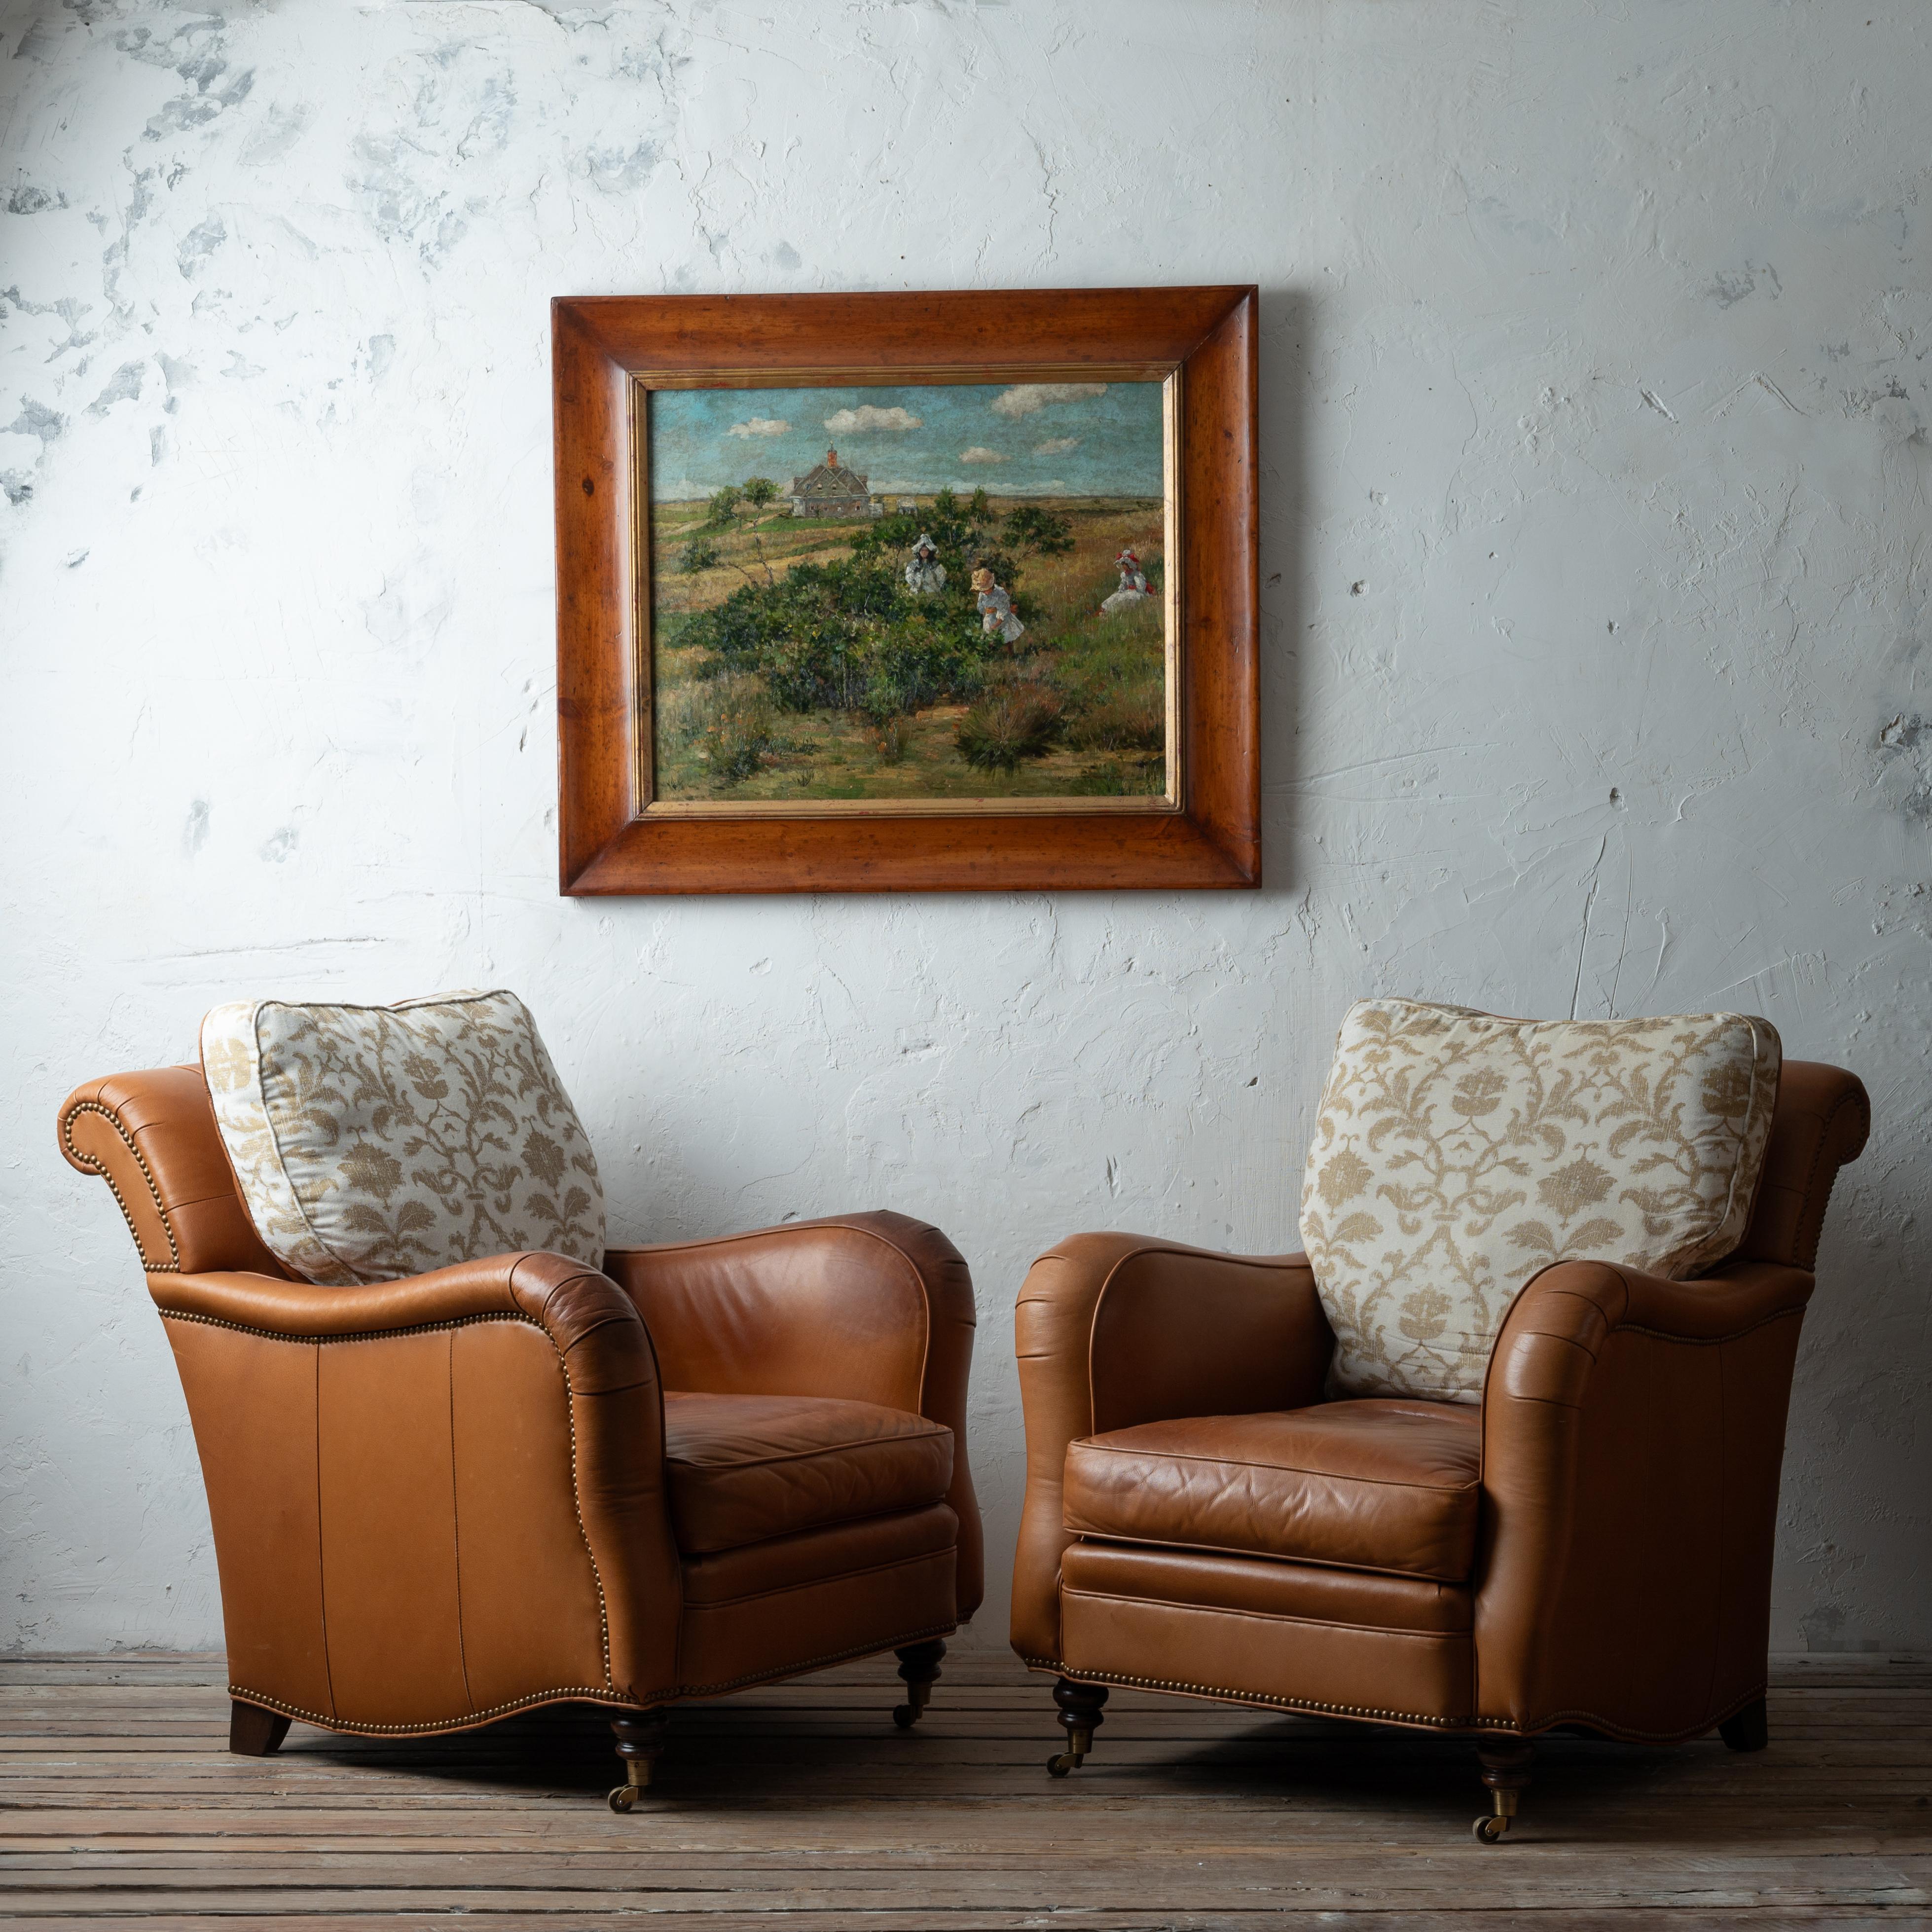 A pair of Lowell leather lounge chairs by Hickory Chair.

33 inches wide by 42 inches deep by 36 inches tall; seat height 18 inches

Good overall with wear, minor scratches and areas of discoloration or patina. 